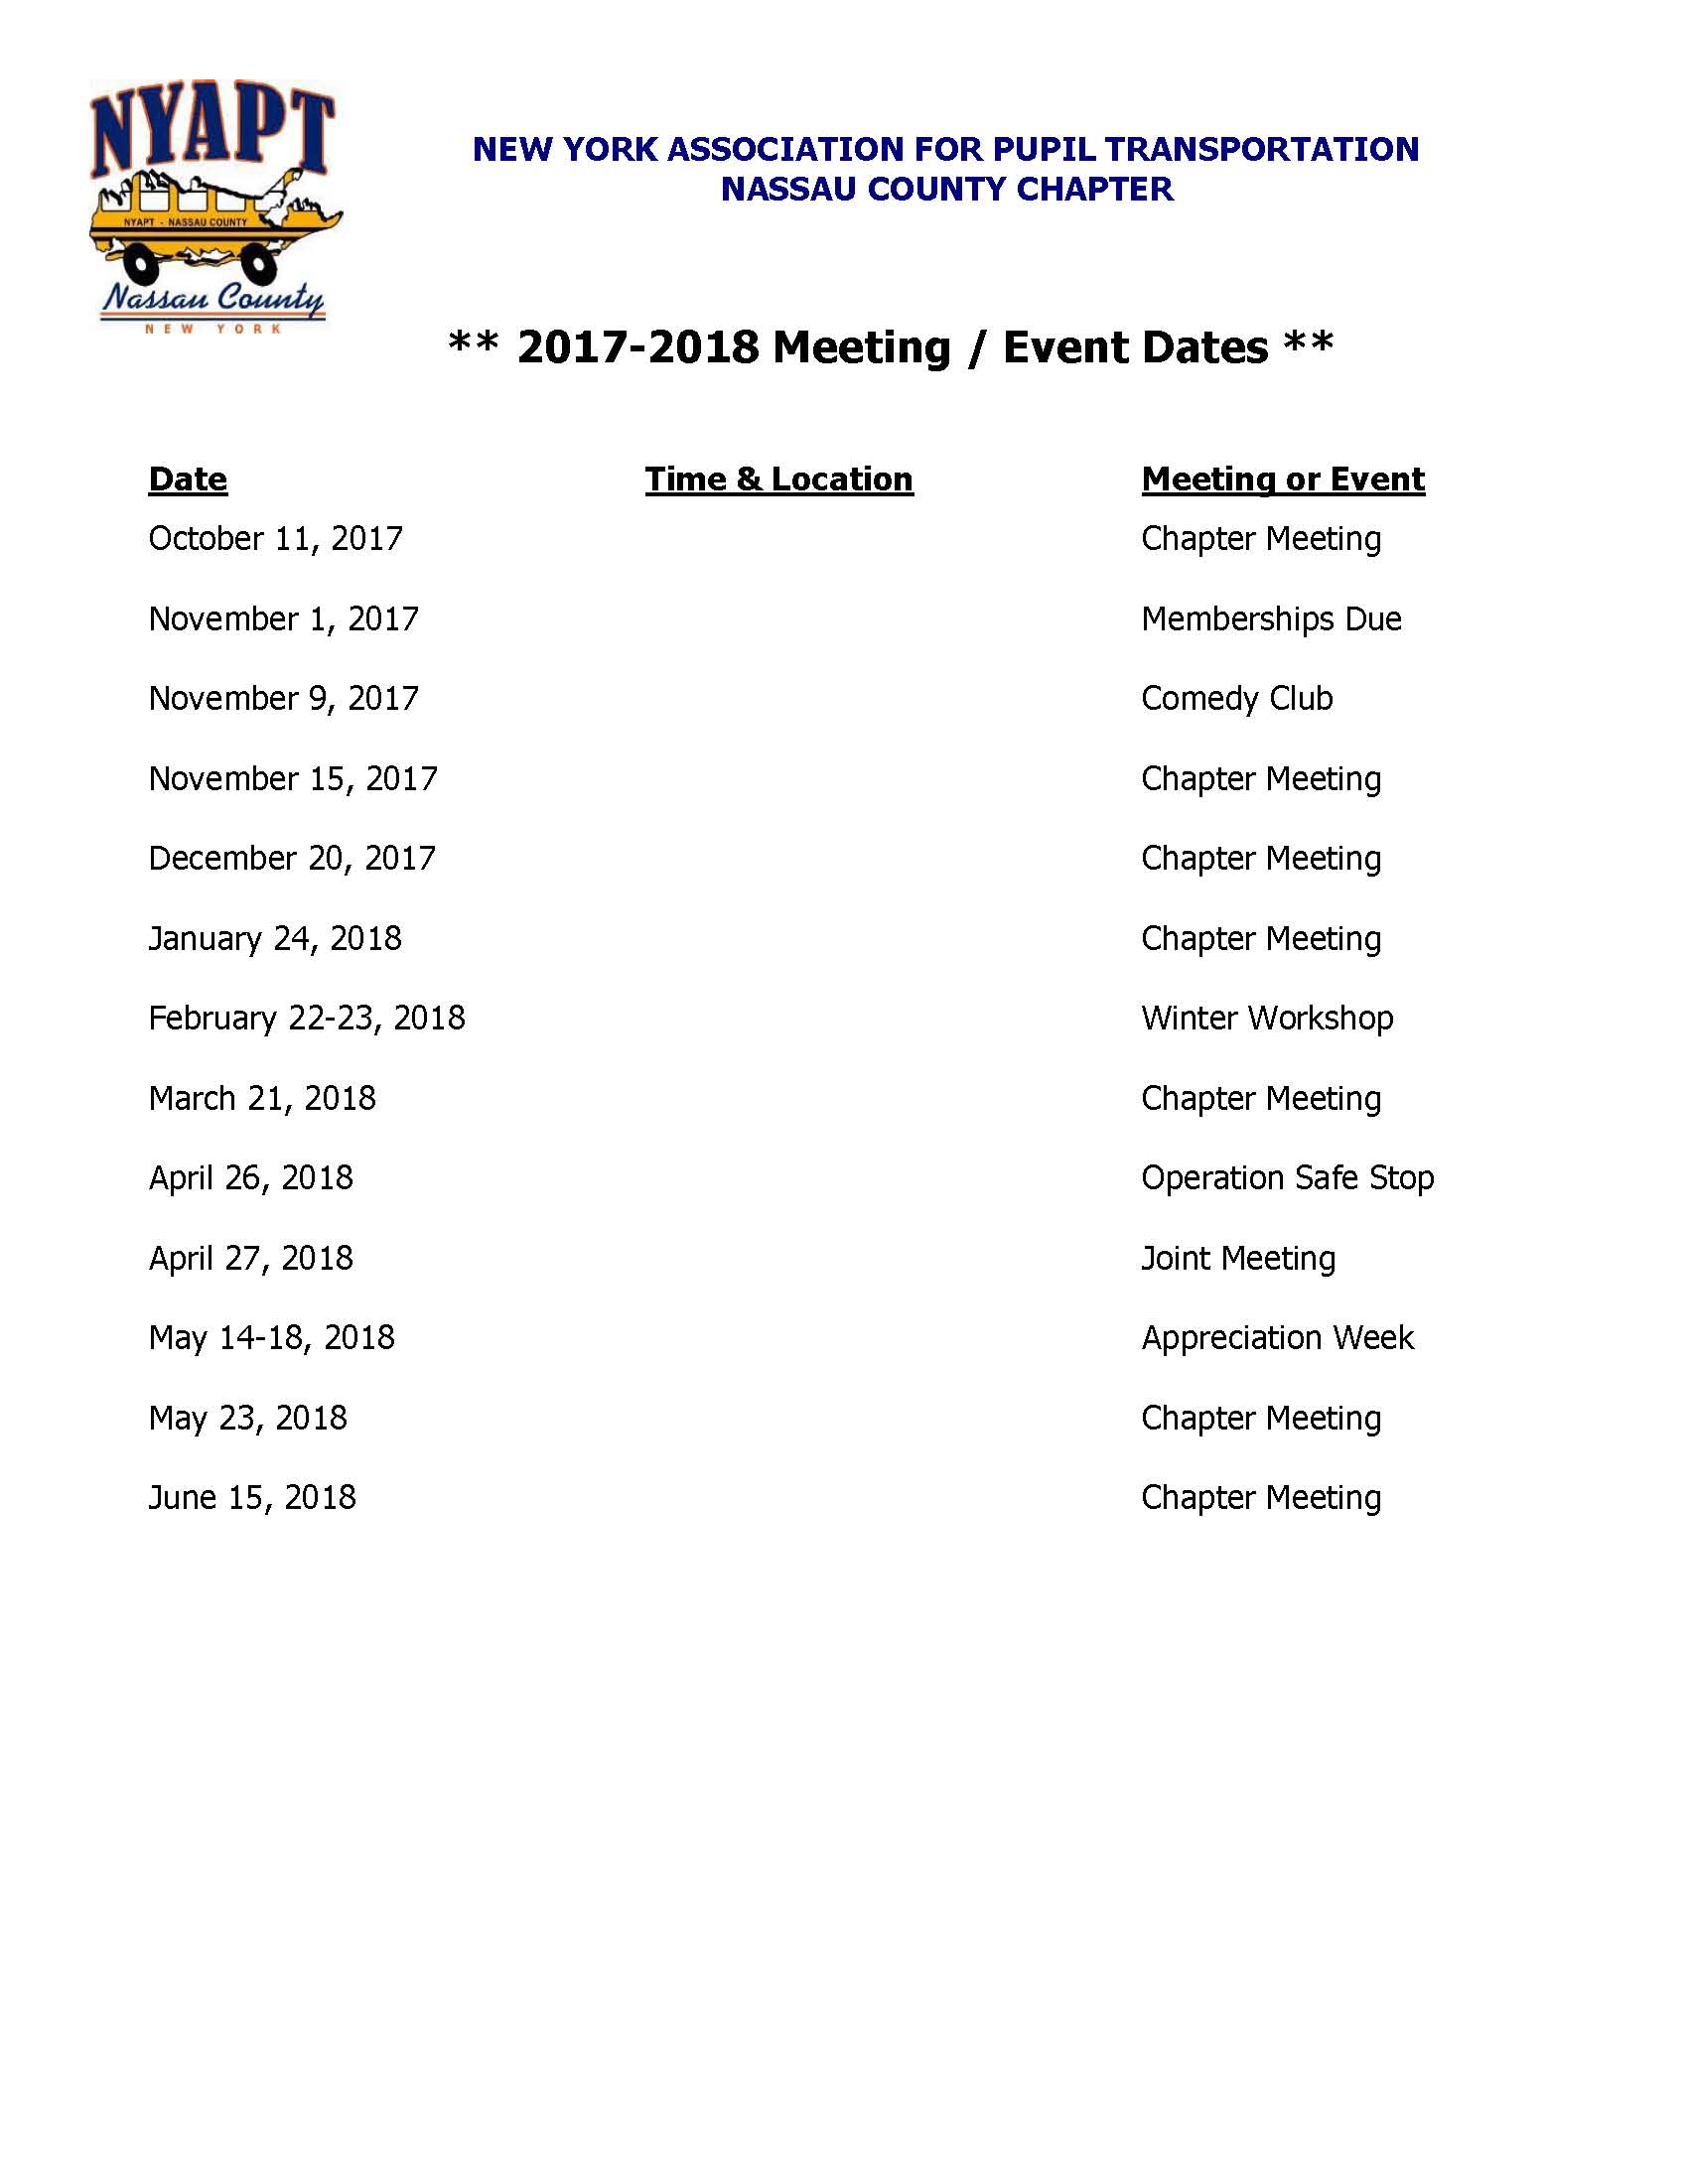 NYAPT Meeting Dates 2018 New York State Nassau County Chapter of Pupil Transportation